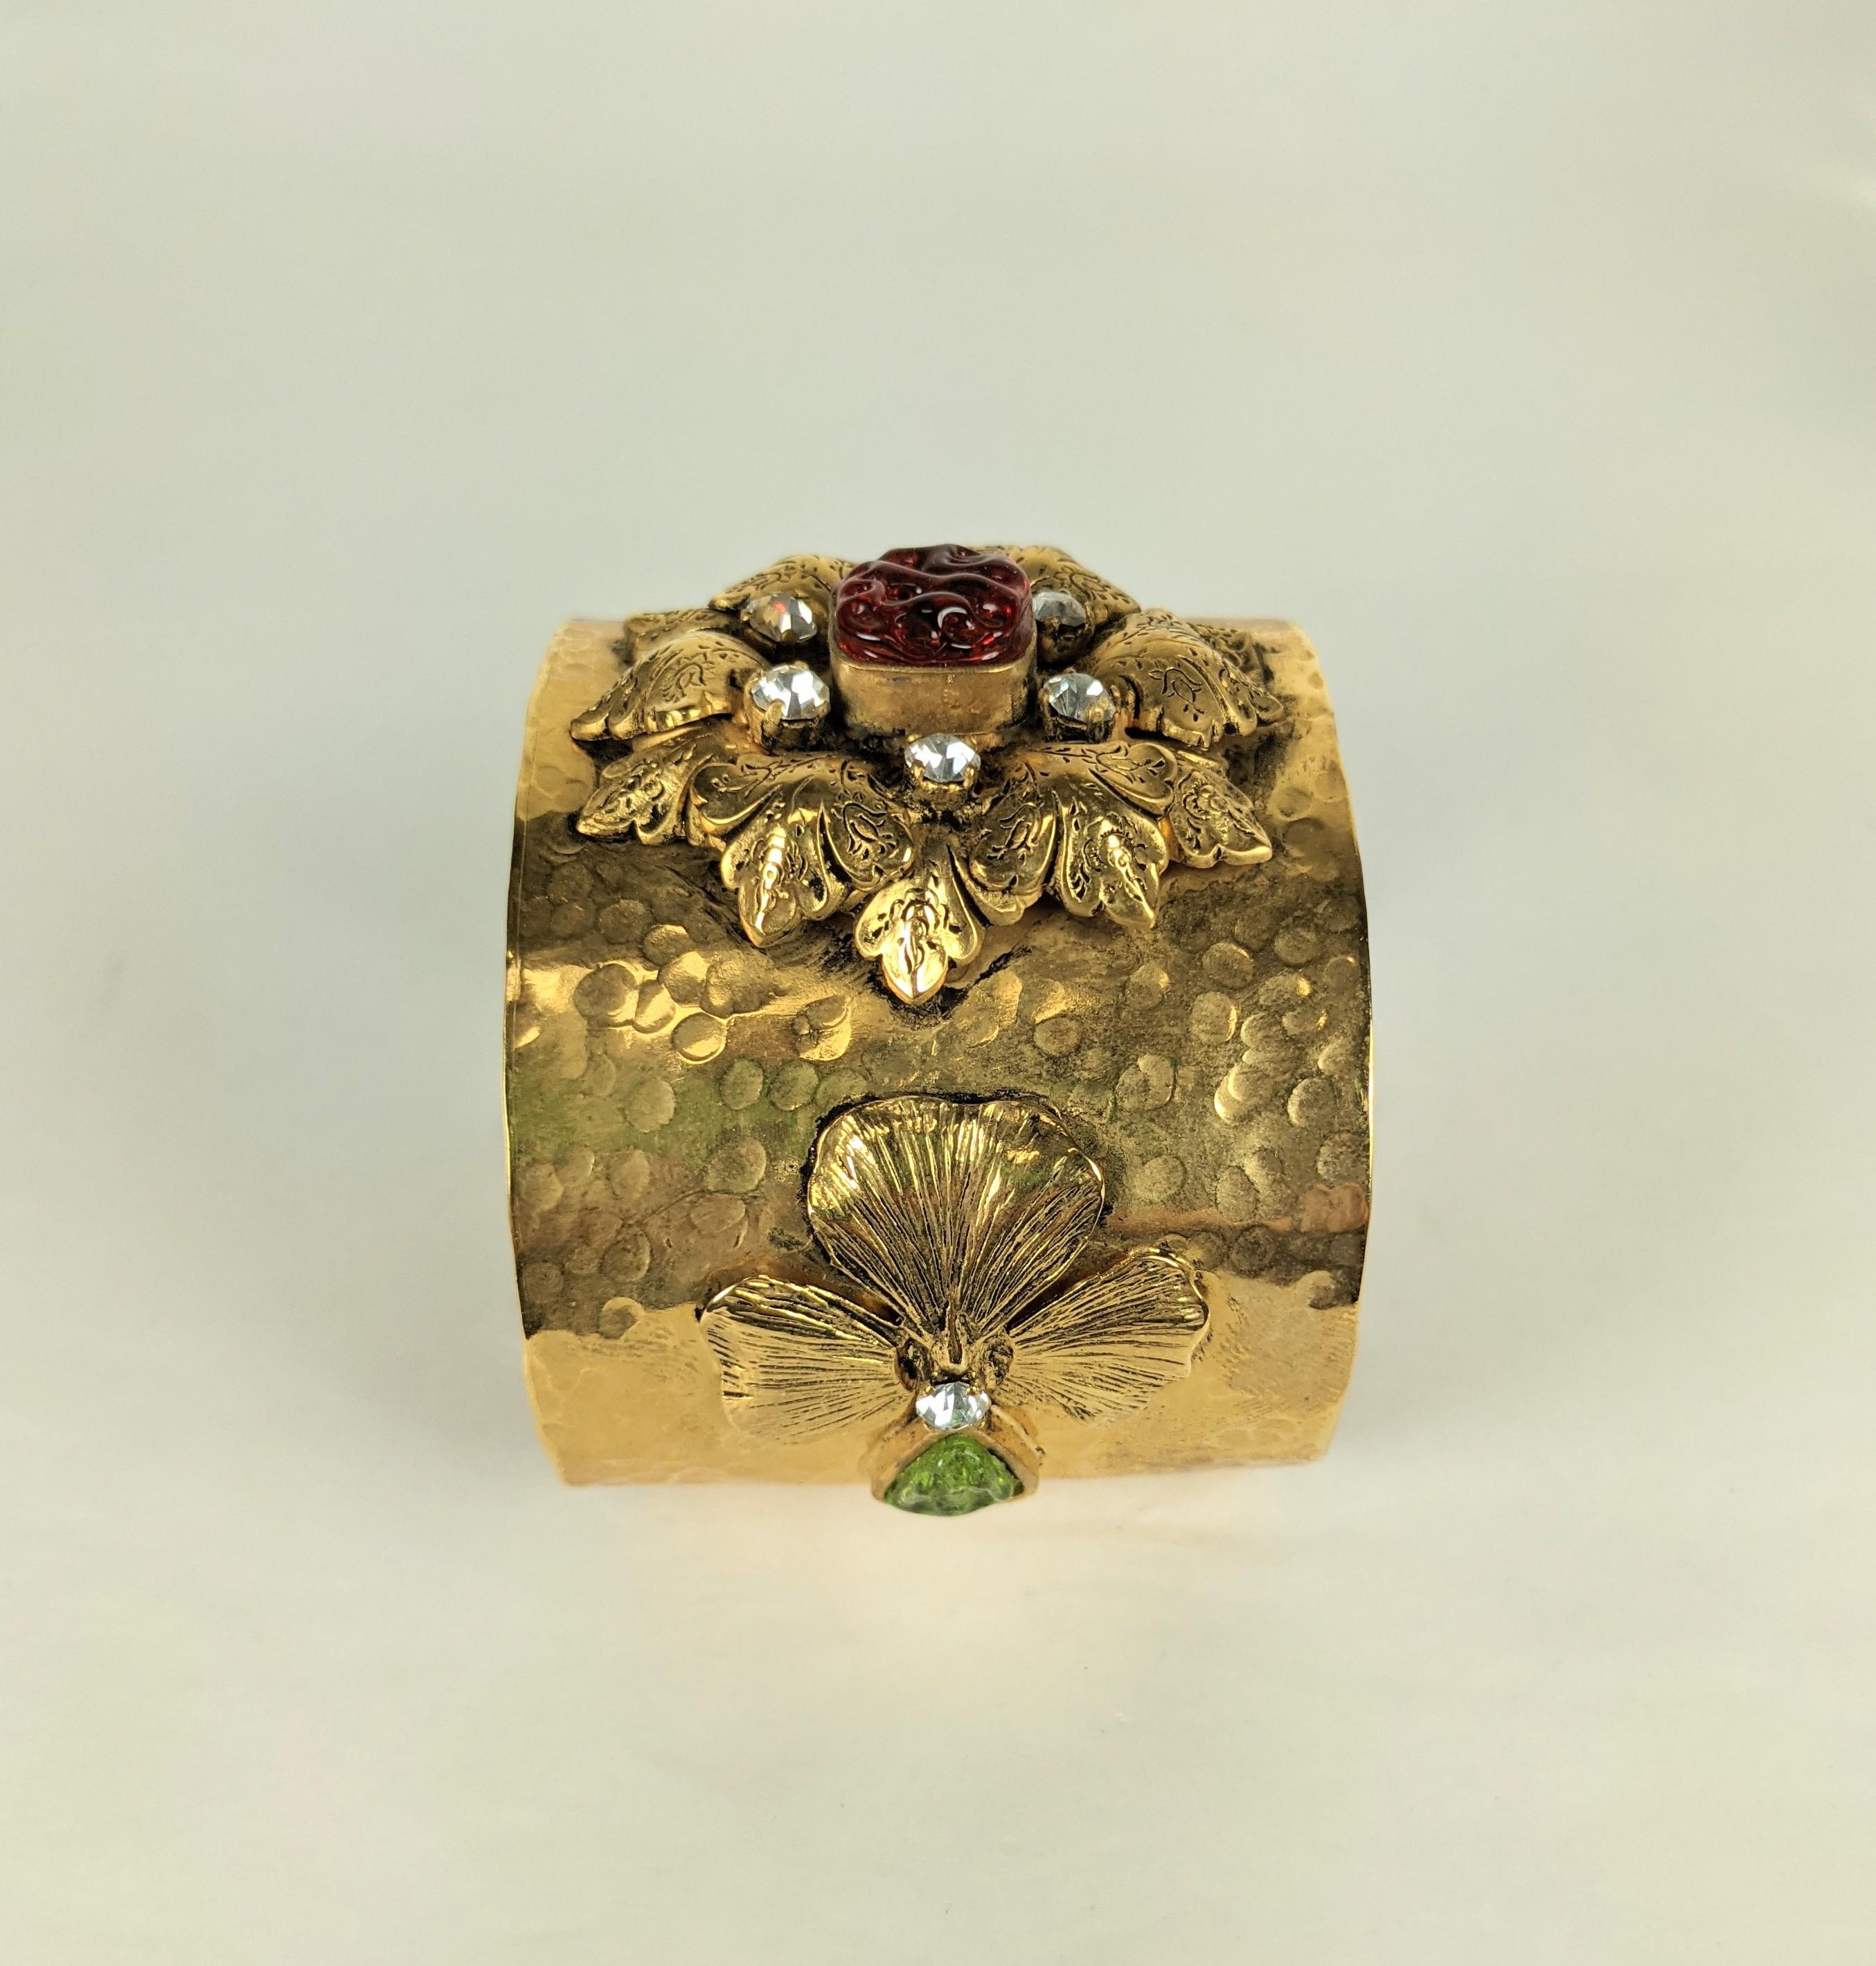 Chanel hand hammered gilt bronze floral cuff bracelet by Maison Gripoix, Paris. The central floral motif of baroque metal petals with center of ruby jelly molded poured glass enamel and crystal rhinestone paste. The side motifs have gilt flower